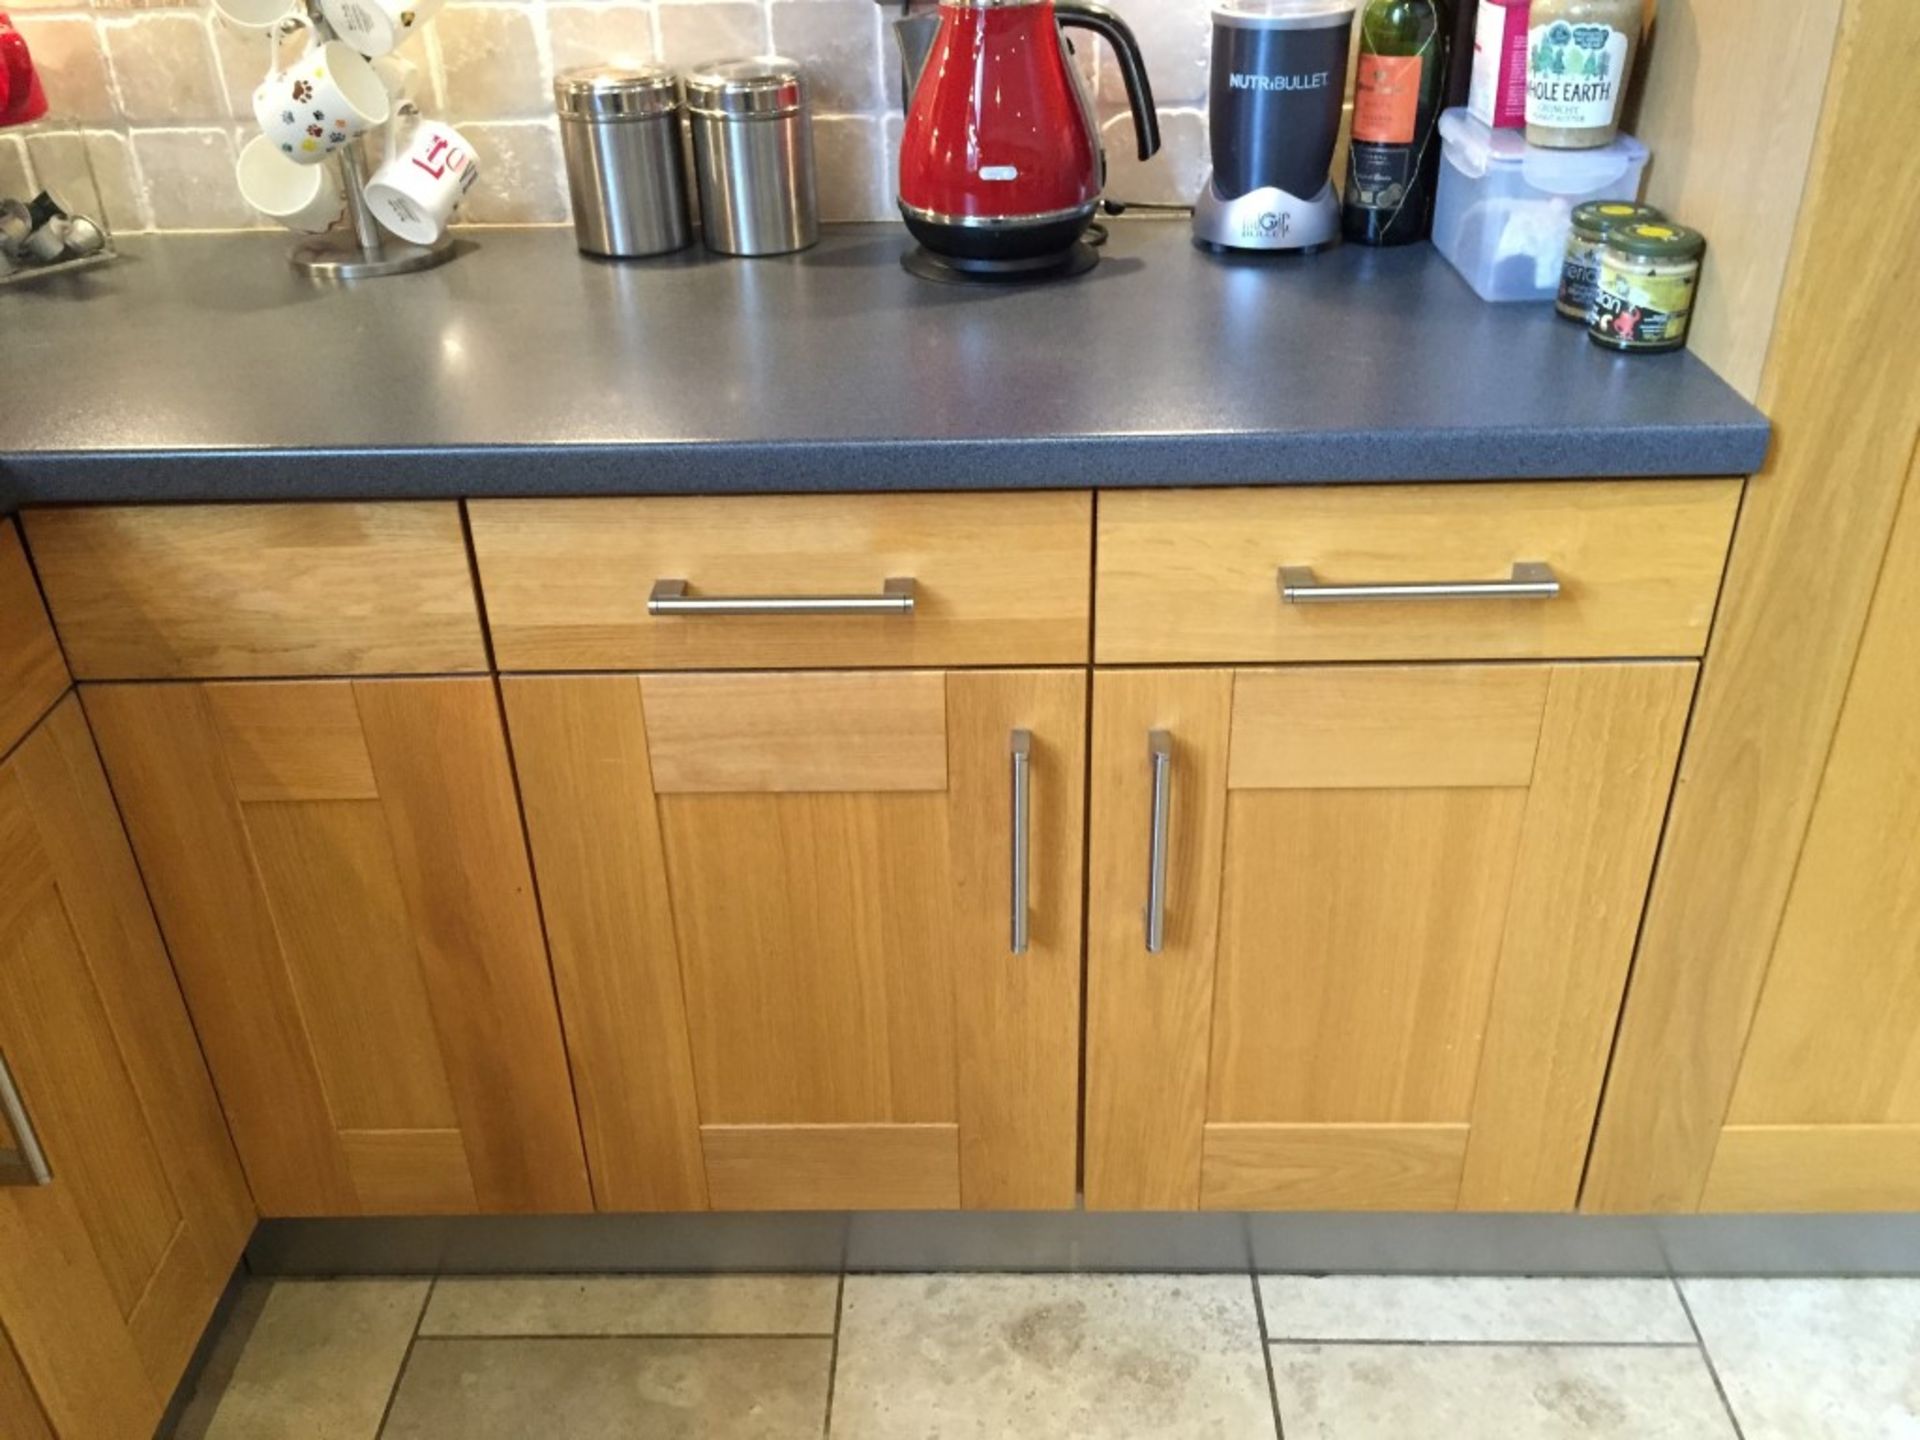 1 x Solid Wood Kitchen By English Rose With Breakfast Bar/Central Island Unit, Laminate Worktops And - Image 30 of 40